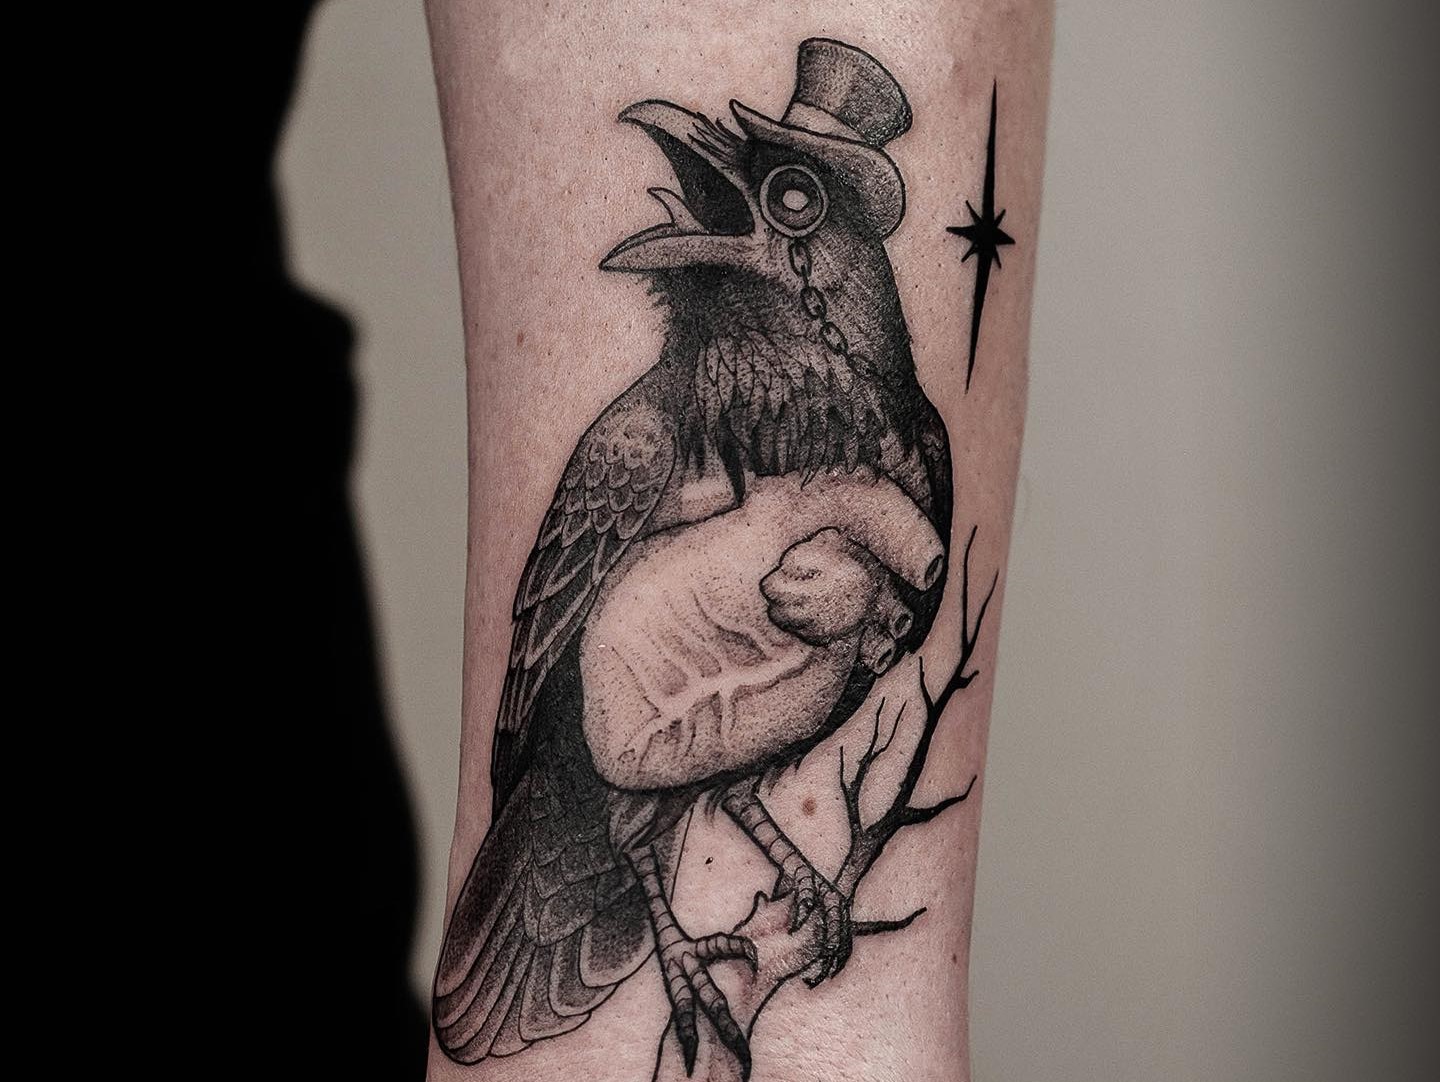 Crow Tattoo Meaning: Exploring the Rich Meanings Infused into Body Ink